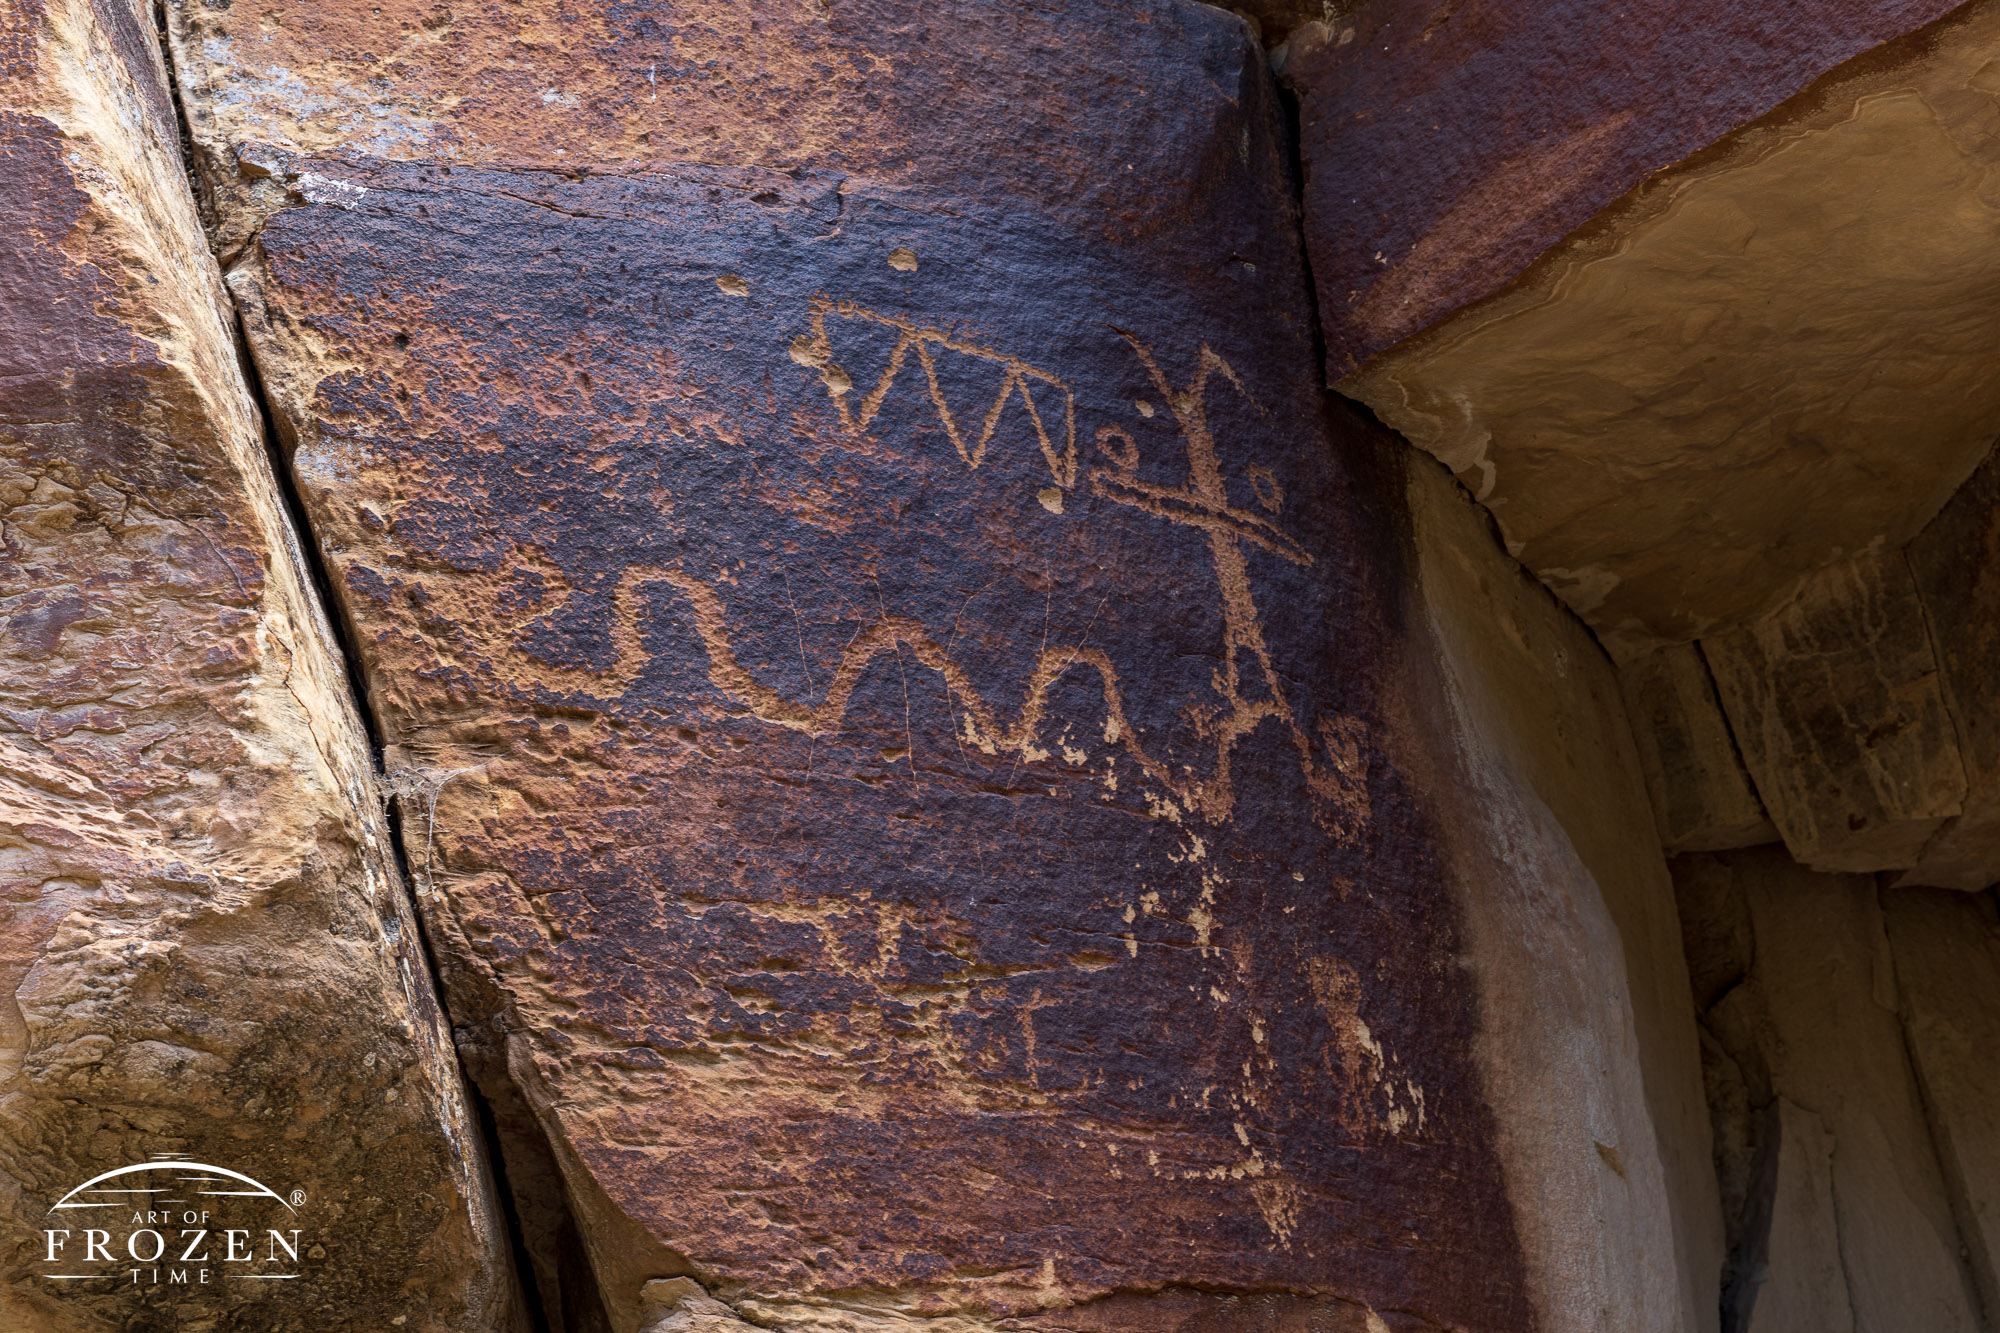 A petroglyph that was tapped into the rock varnish by native people 1,000 years ago depicting aspects of their life they wanted to share.